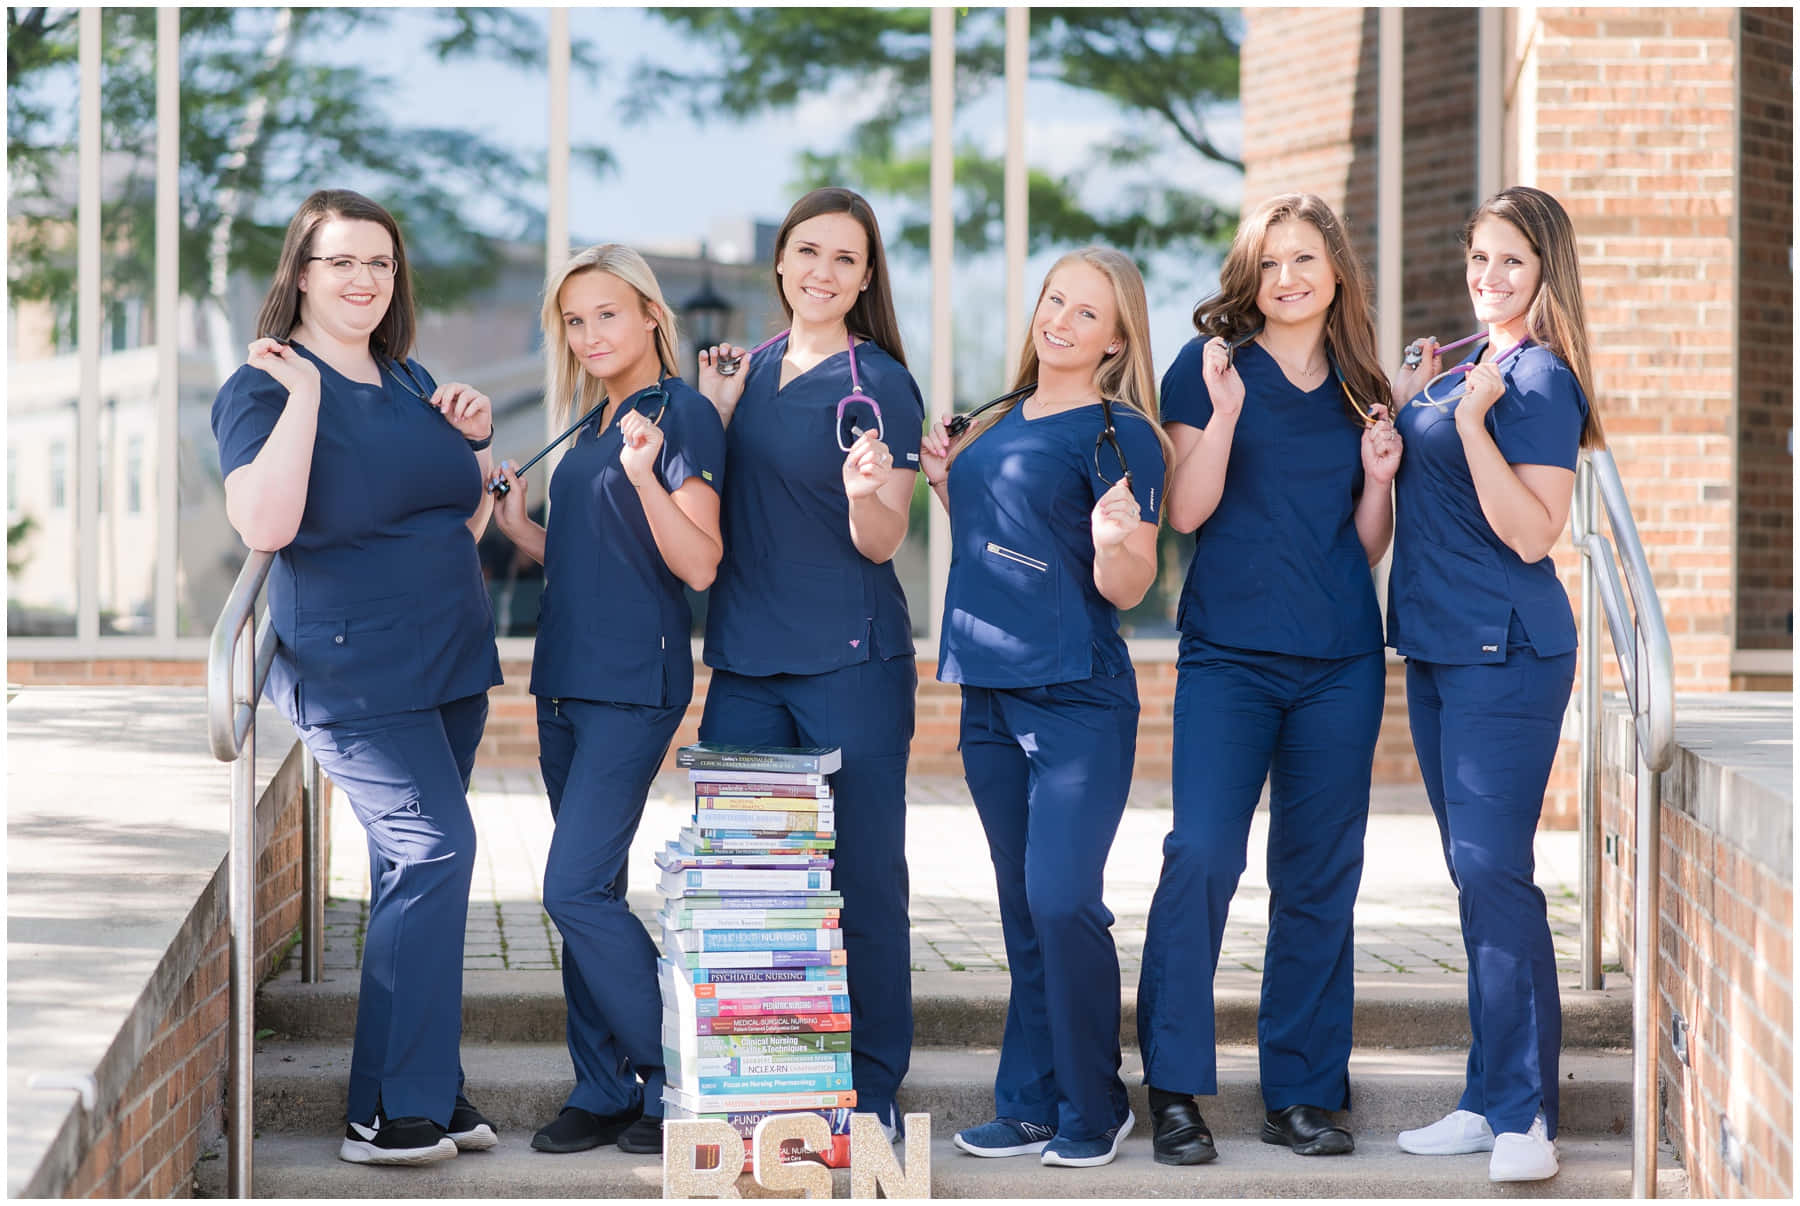 A Group Of Female Nurses Posing With Books